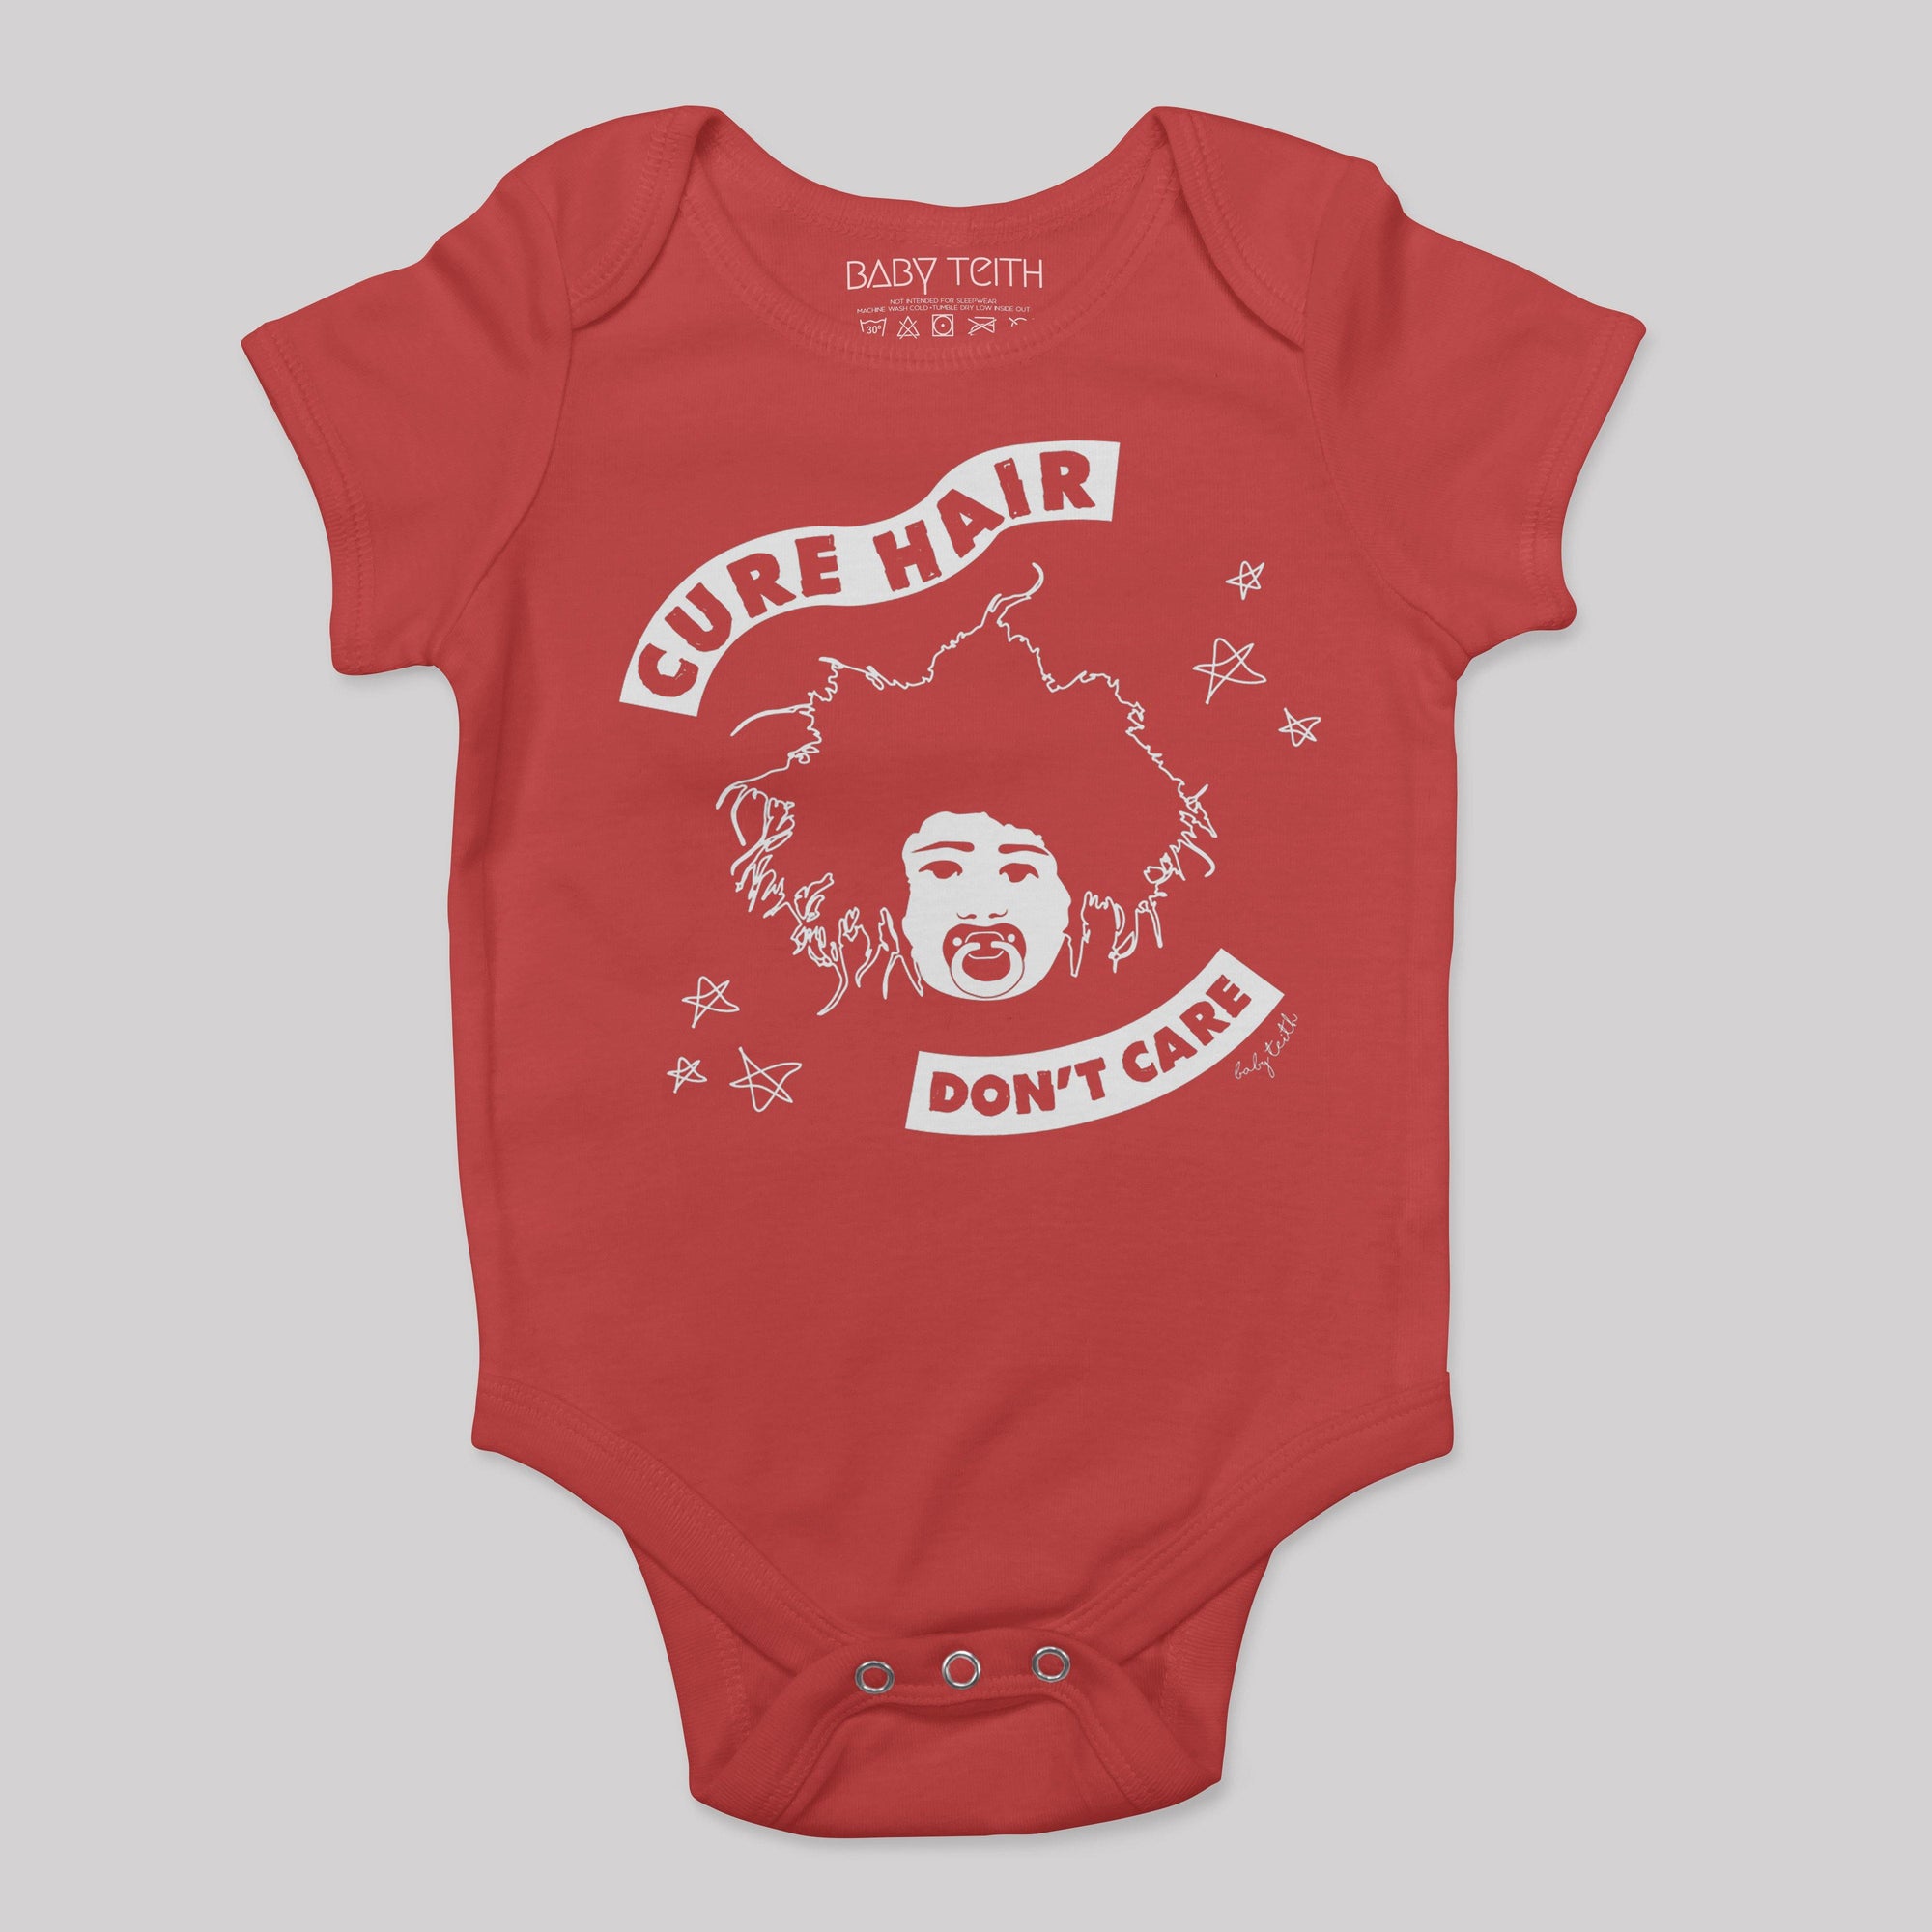 "Cure Hair Don't Care" Bodysuit for Babies - Baby Teith